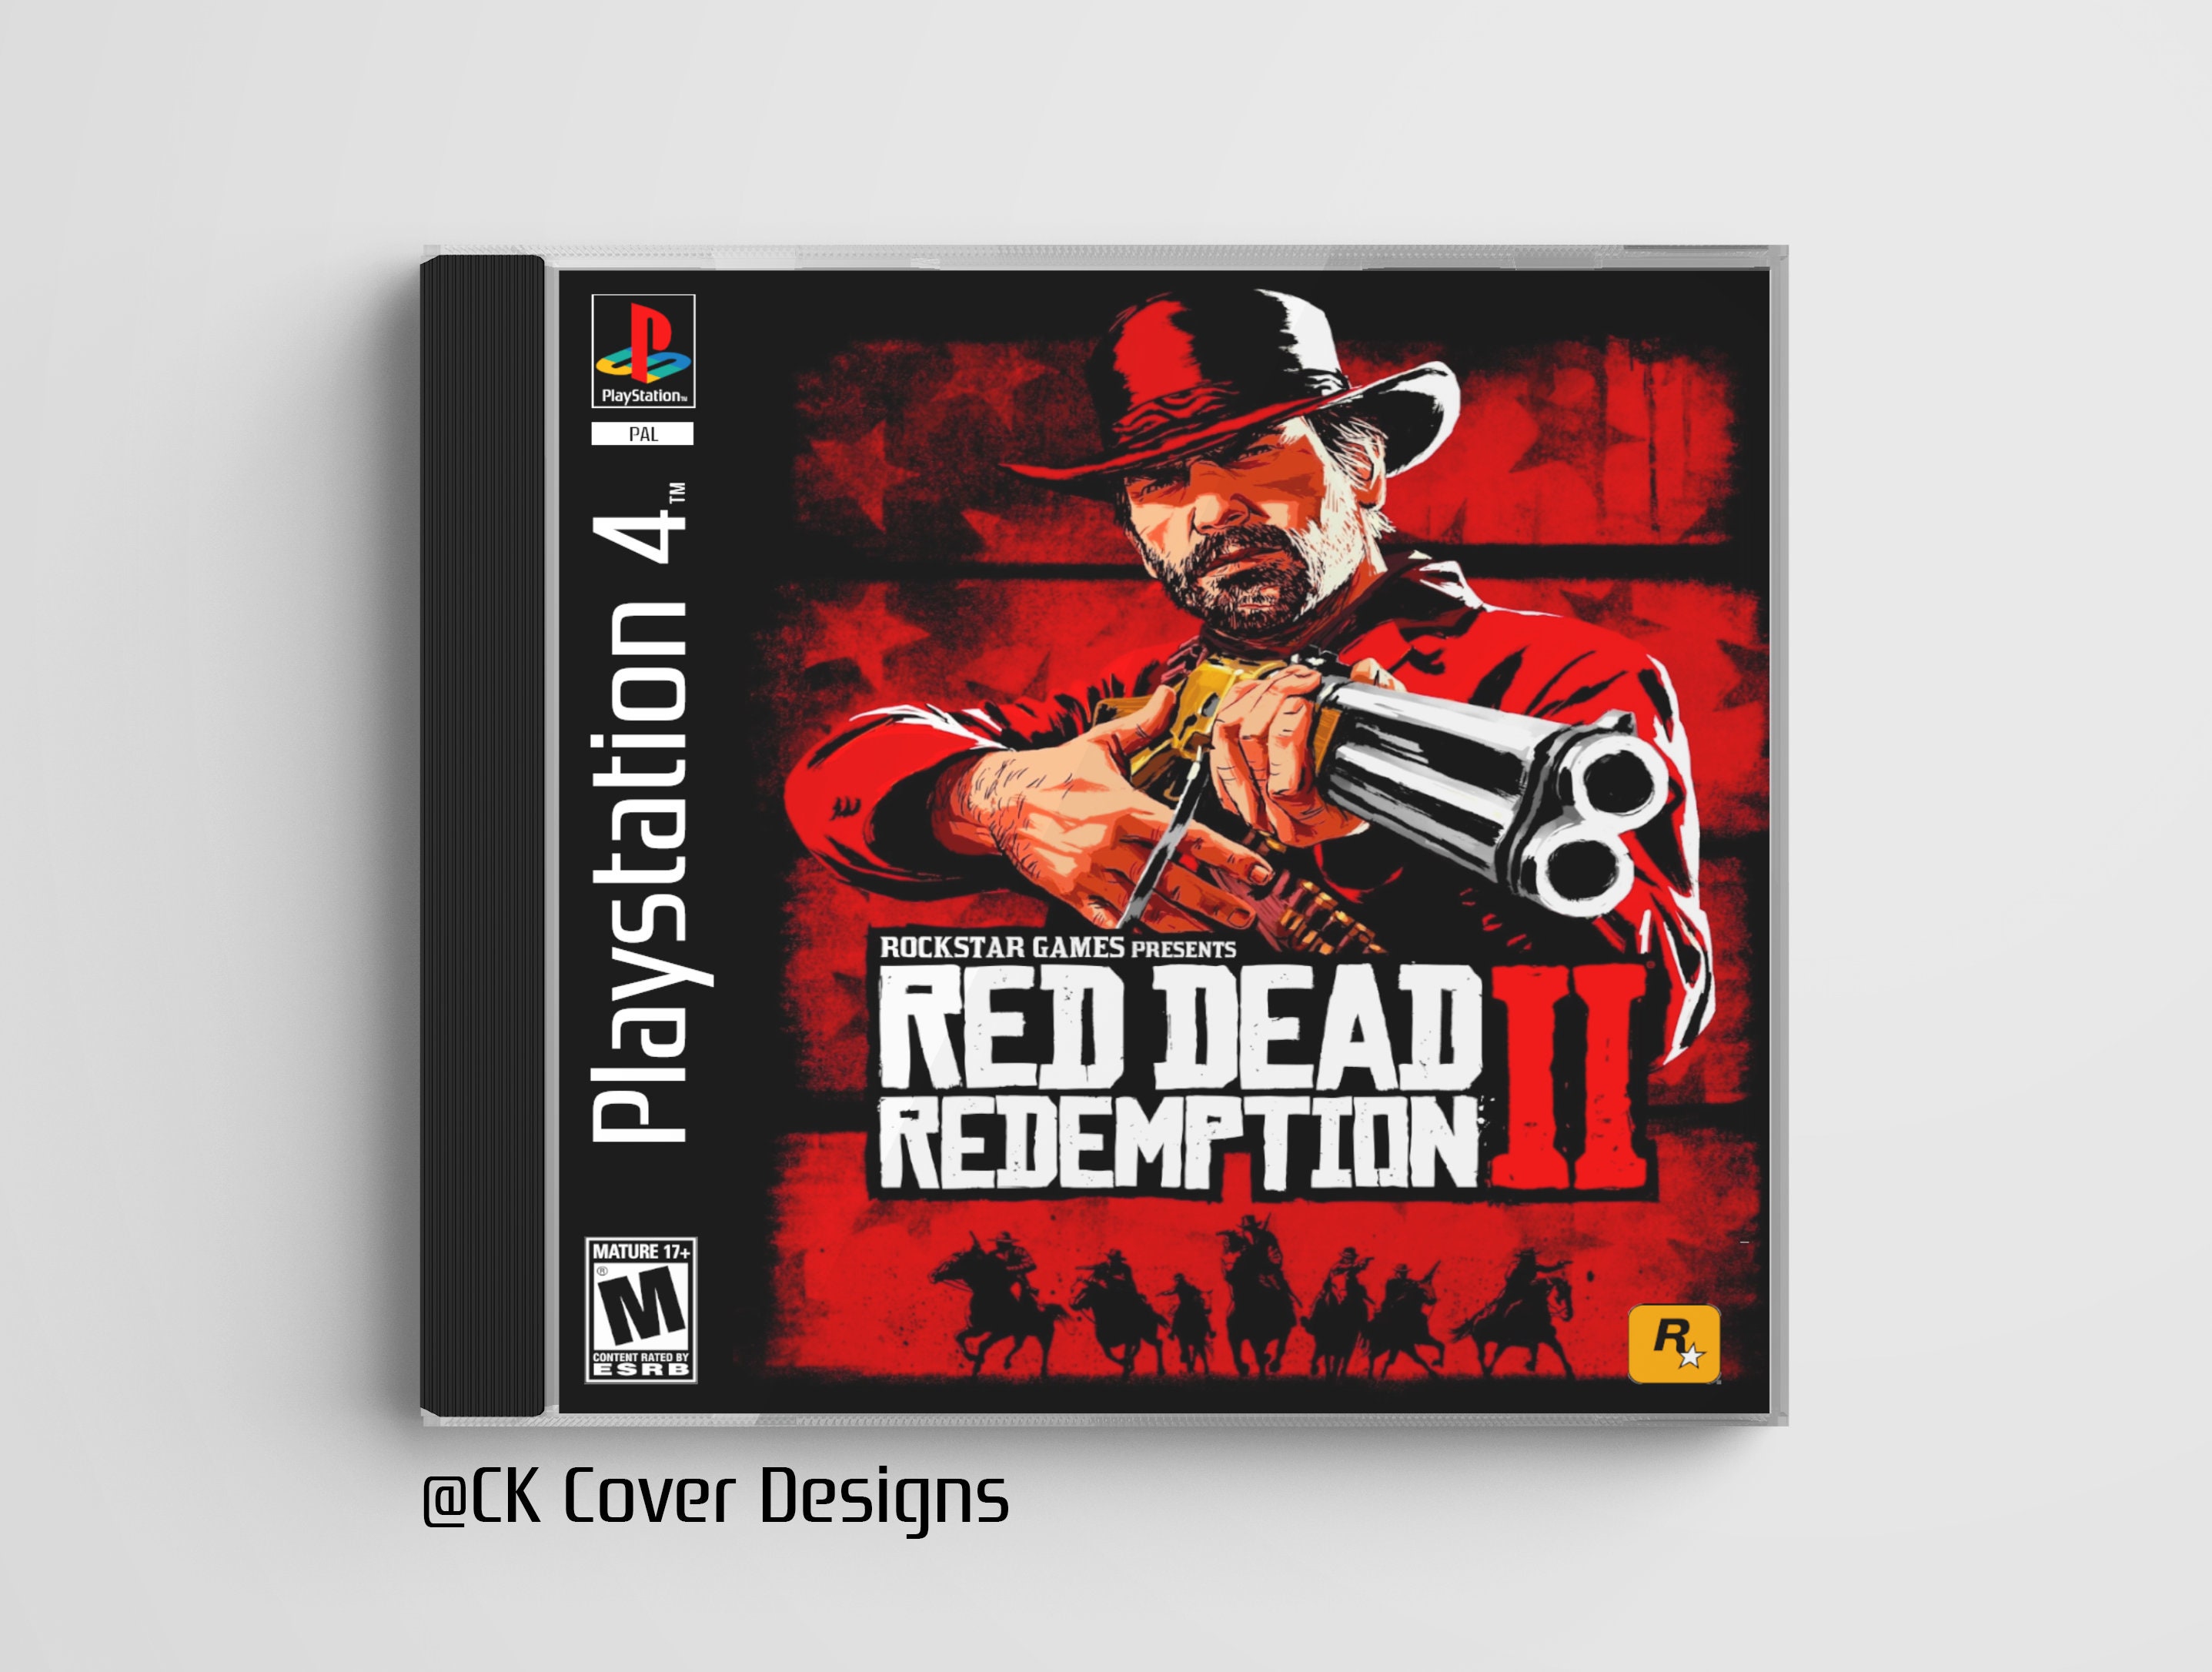 Red redemption 1 ps4. Red Dead Redemption книга. Книги про ред дед редемпшн. Артбук Red Dead Redemption 2. Rdr 2 книга.